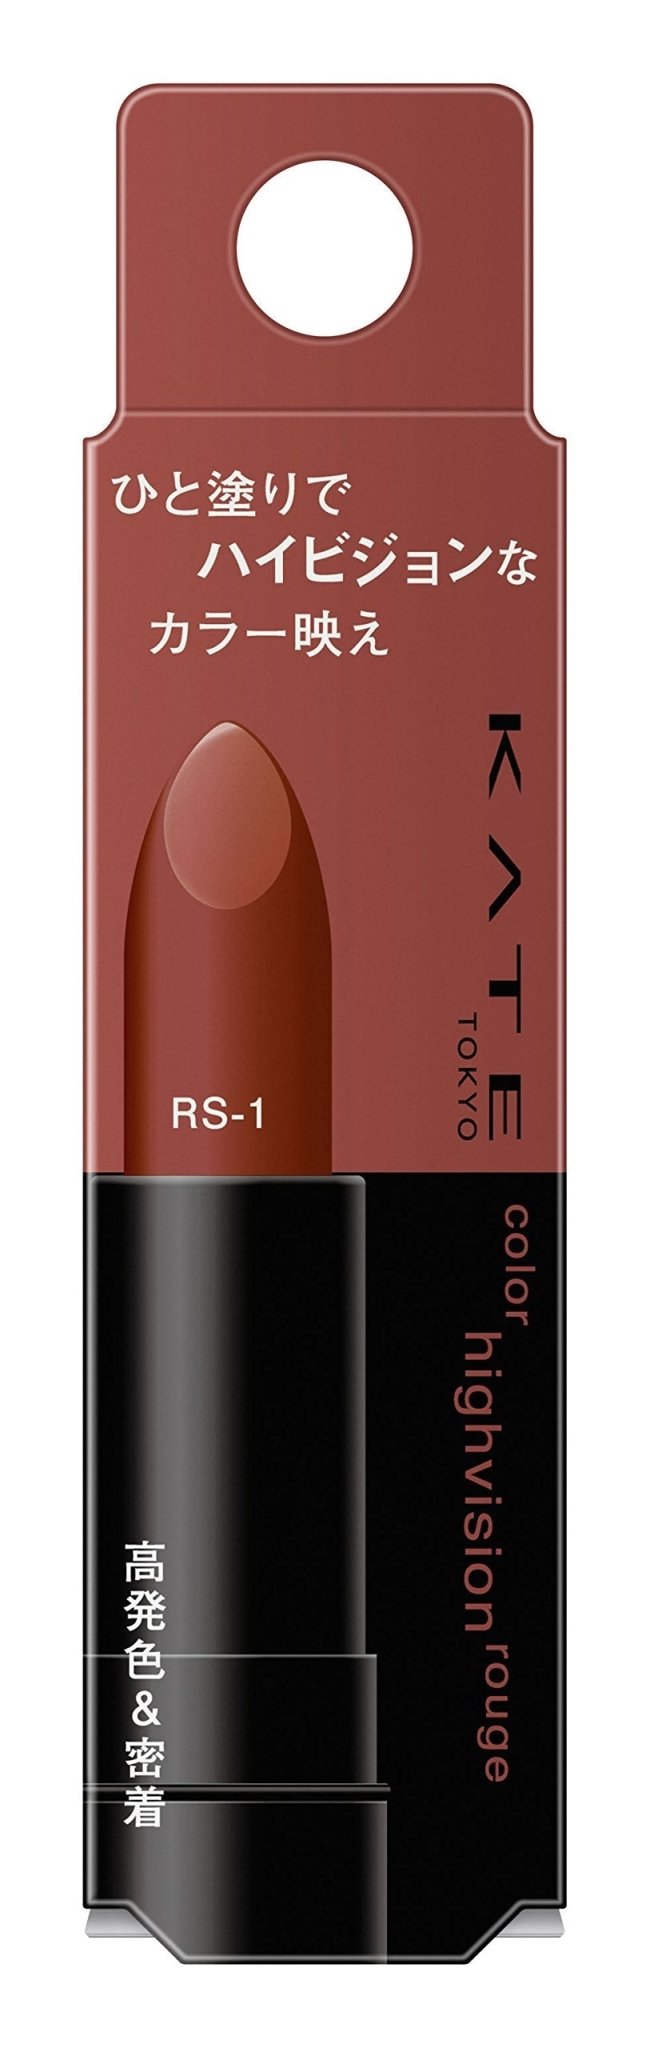 Kate High Vision Rouge RS - 1 - Brilliant Rouge Color Makeup Product